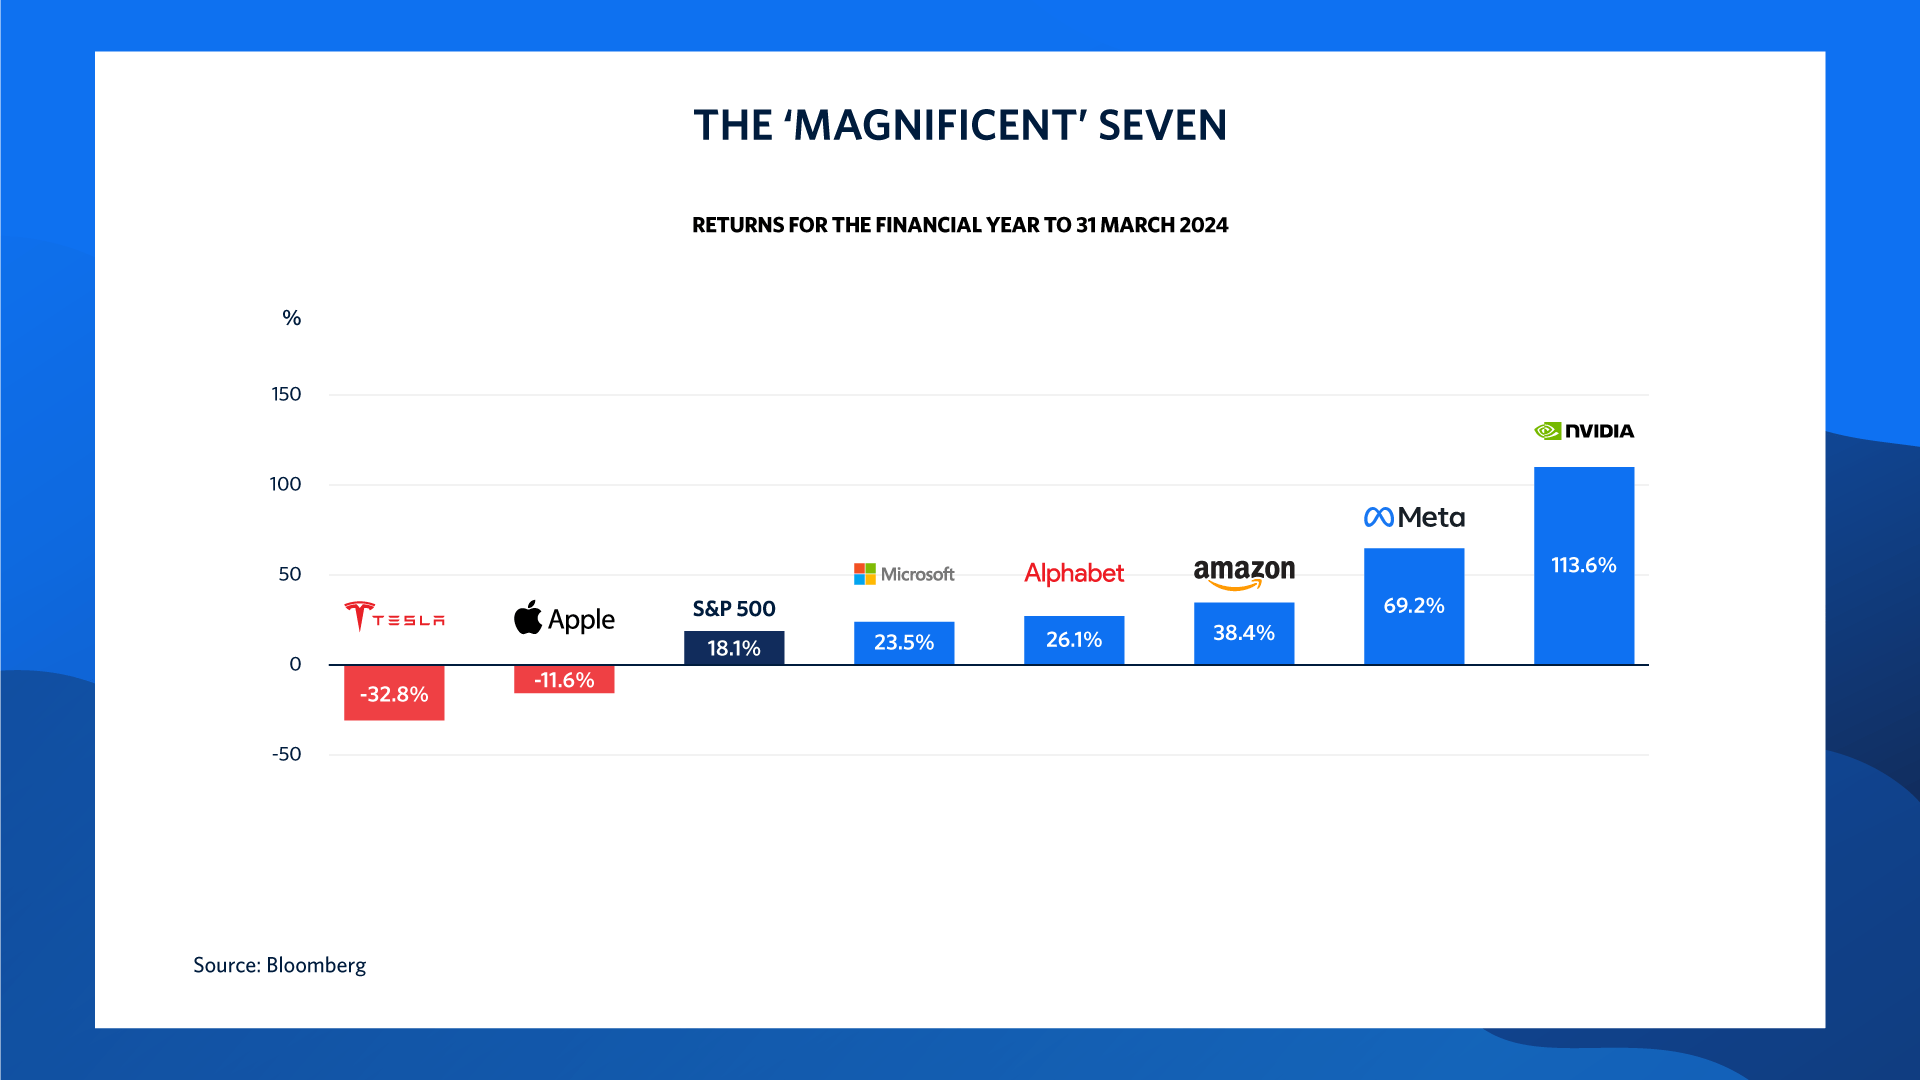 Chart 2: A graph showing the financial year returns to 31 March 2024 of the ‘Magnificent’ Seven. Telsa: -32.8%. Apple: -11.6%. The S&P 500: 18.1%. Microsoft: 23.5%. Alphabet: 26.1%. Amazon: 38.4%. Meta: 69.2%. Nvidia: 113.6%. 